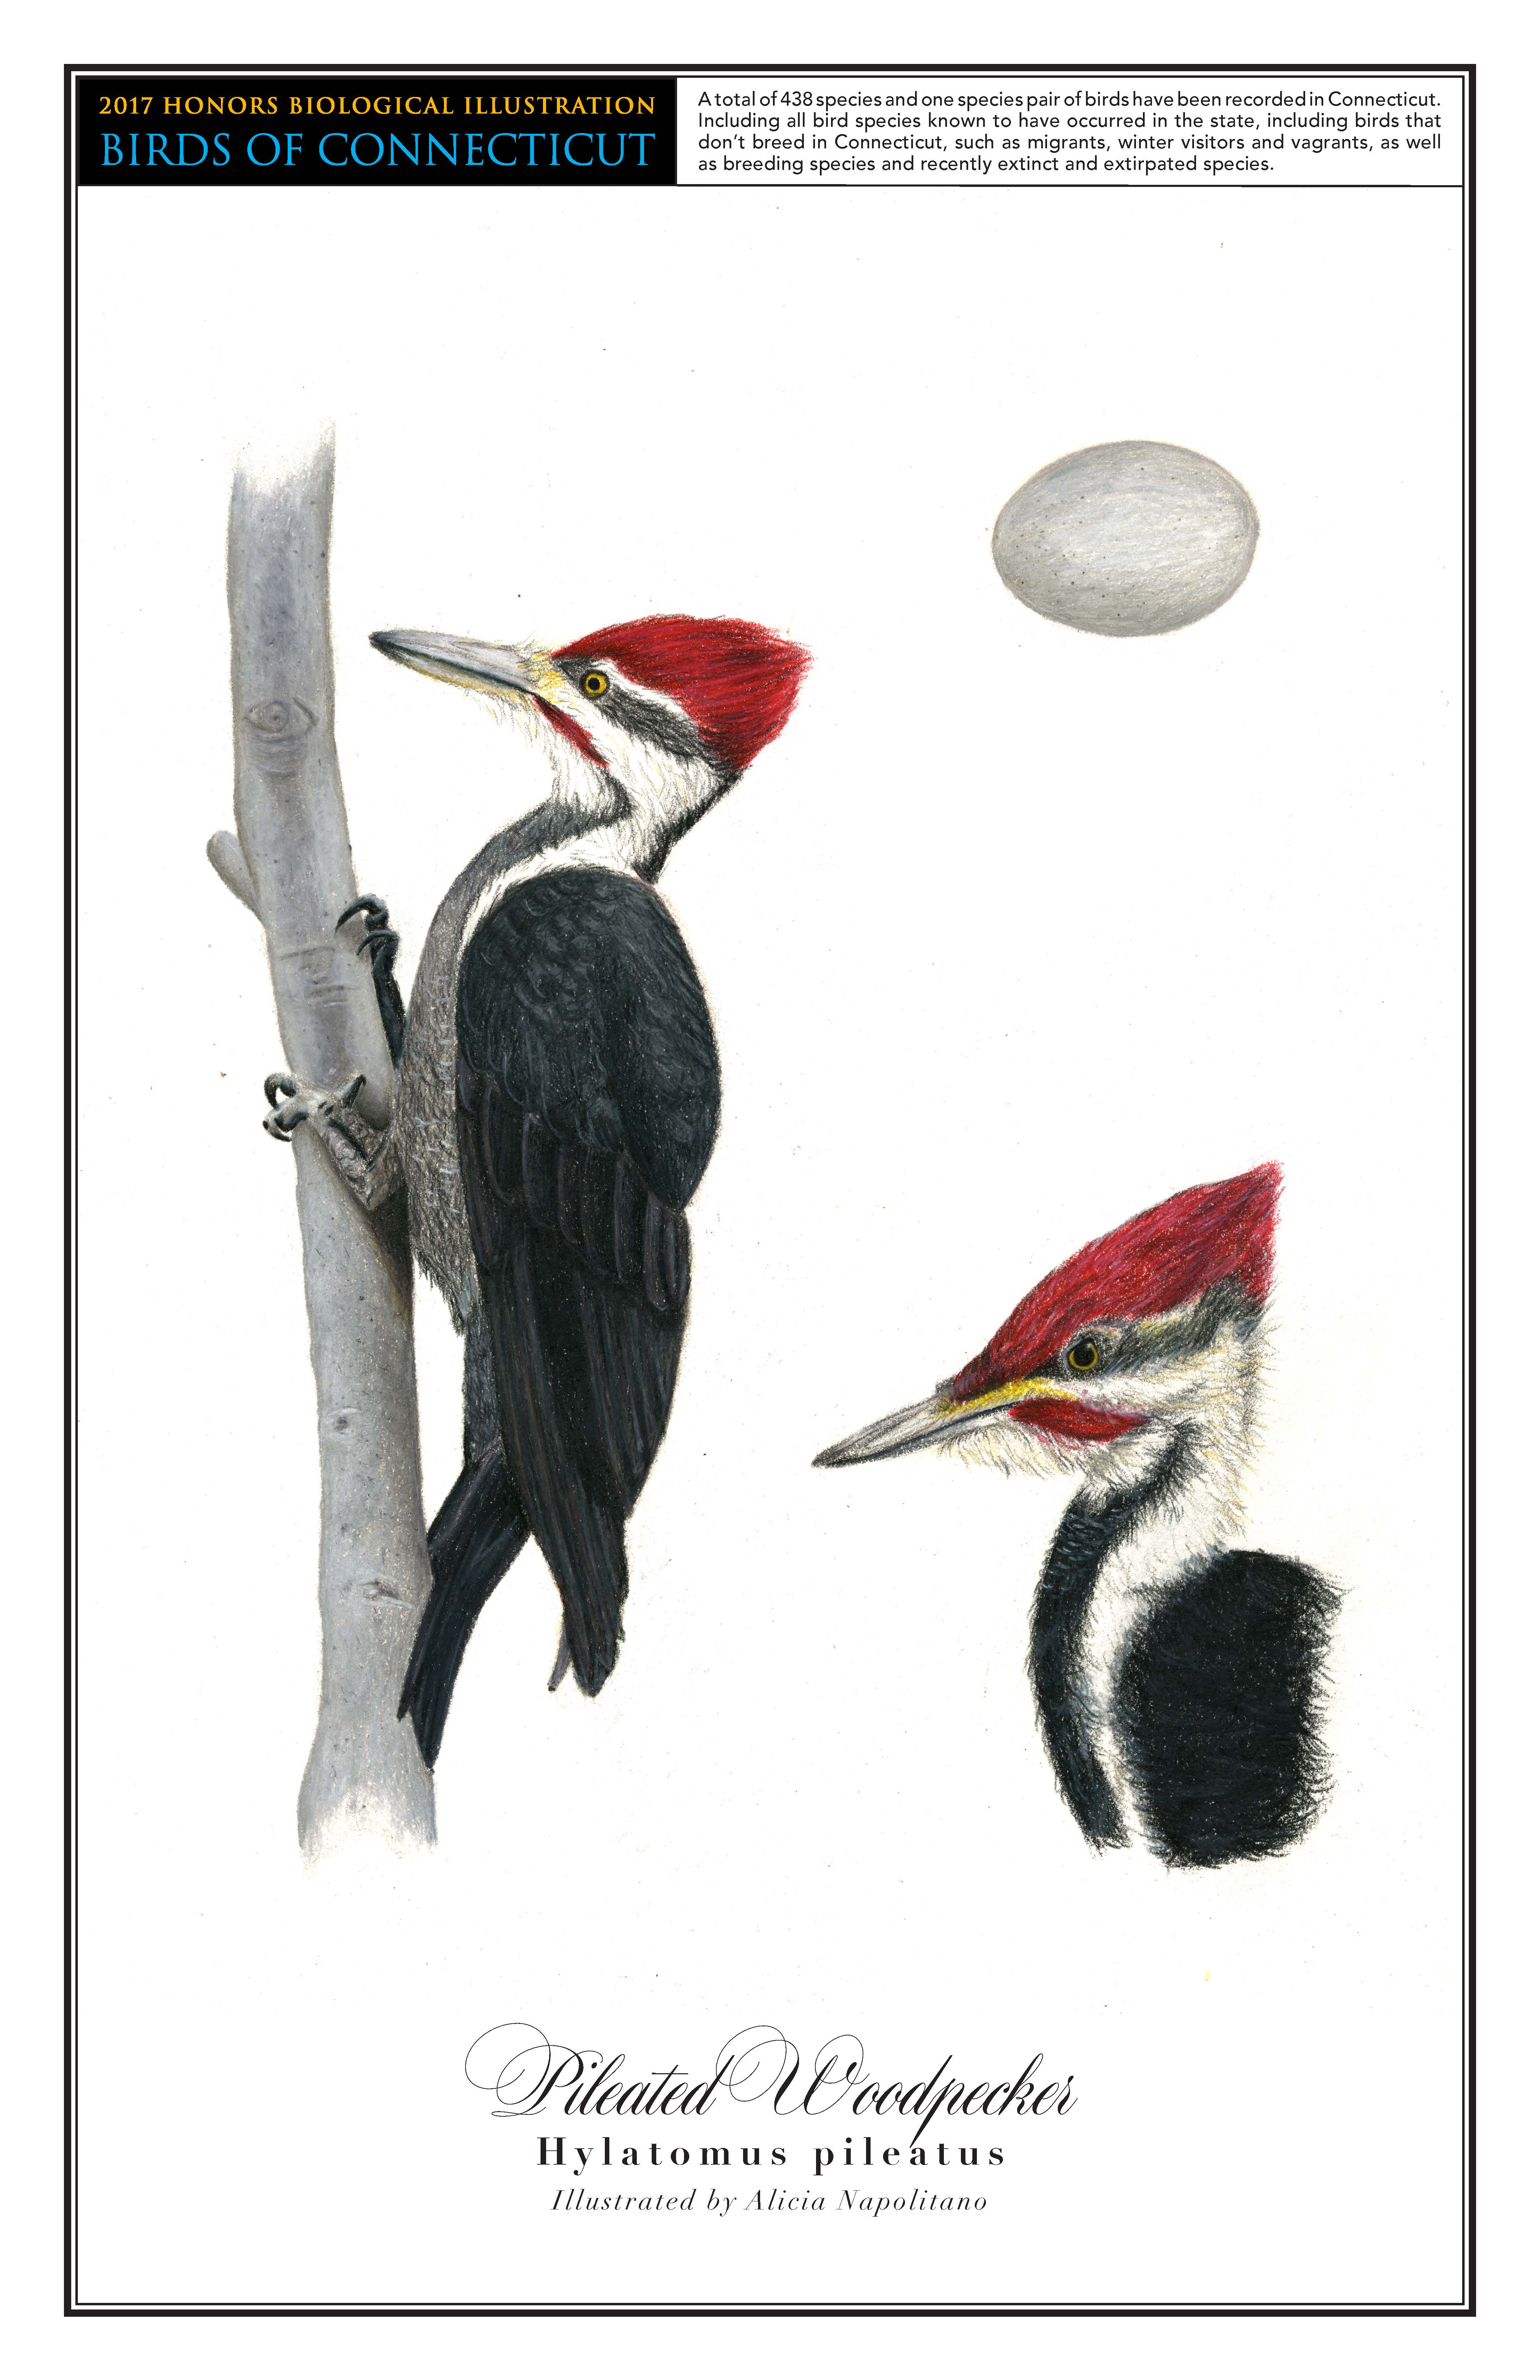 The pileated woodpecker has a red crested head and a black and white body. On the left is a drawing of it perched on a vertical branch. A close up drawing of its head is in the bottom right corner, and a drawing of its light gray egg is in the top right.